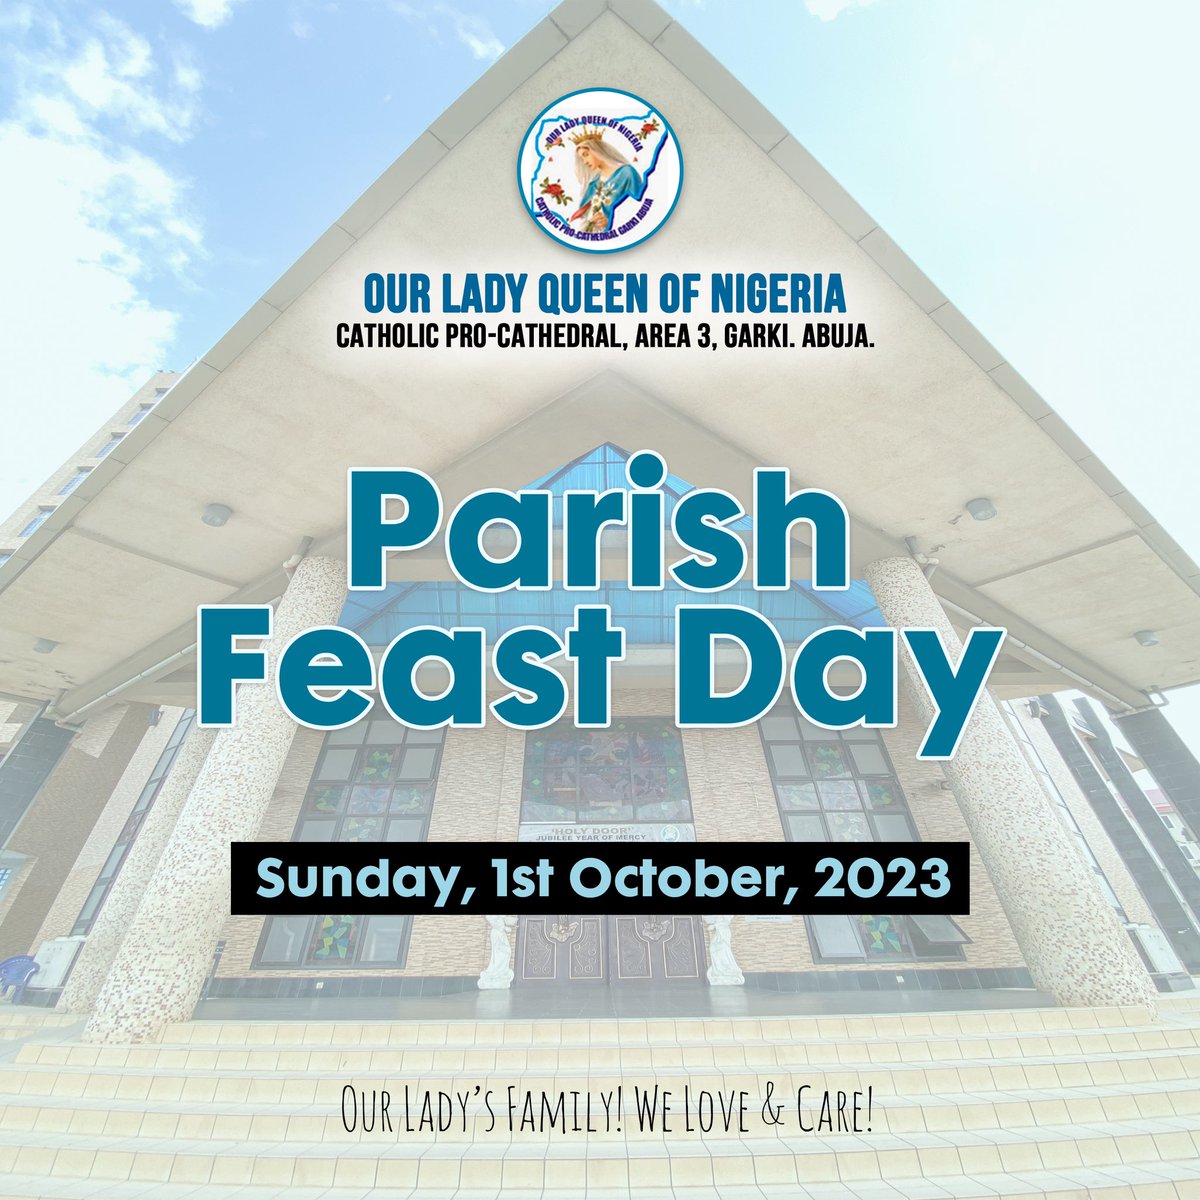 OLQN FEAST DAY 🎉
Dear Parishioners,

Please be informed that this Sunday, 
the 1st of October is our parish feast day!

Do dress in your lovely 😍 parish uniforms. ☺️😁

Our Lady's Family...
We Love and Care...

#happyfeastday #olqnfeastday #Olqn #Abuja #Nigeria #Catholic